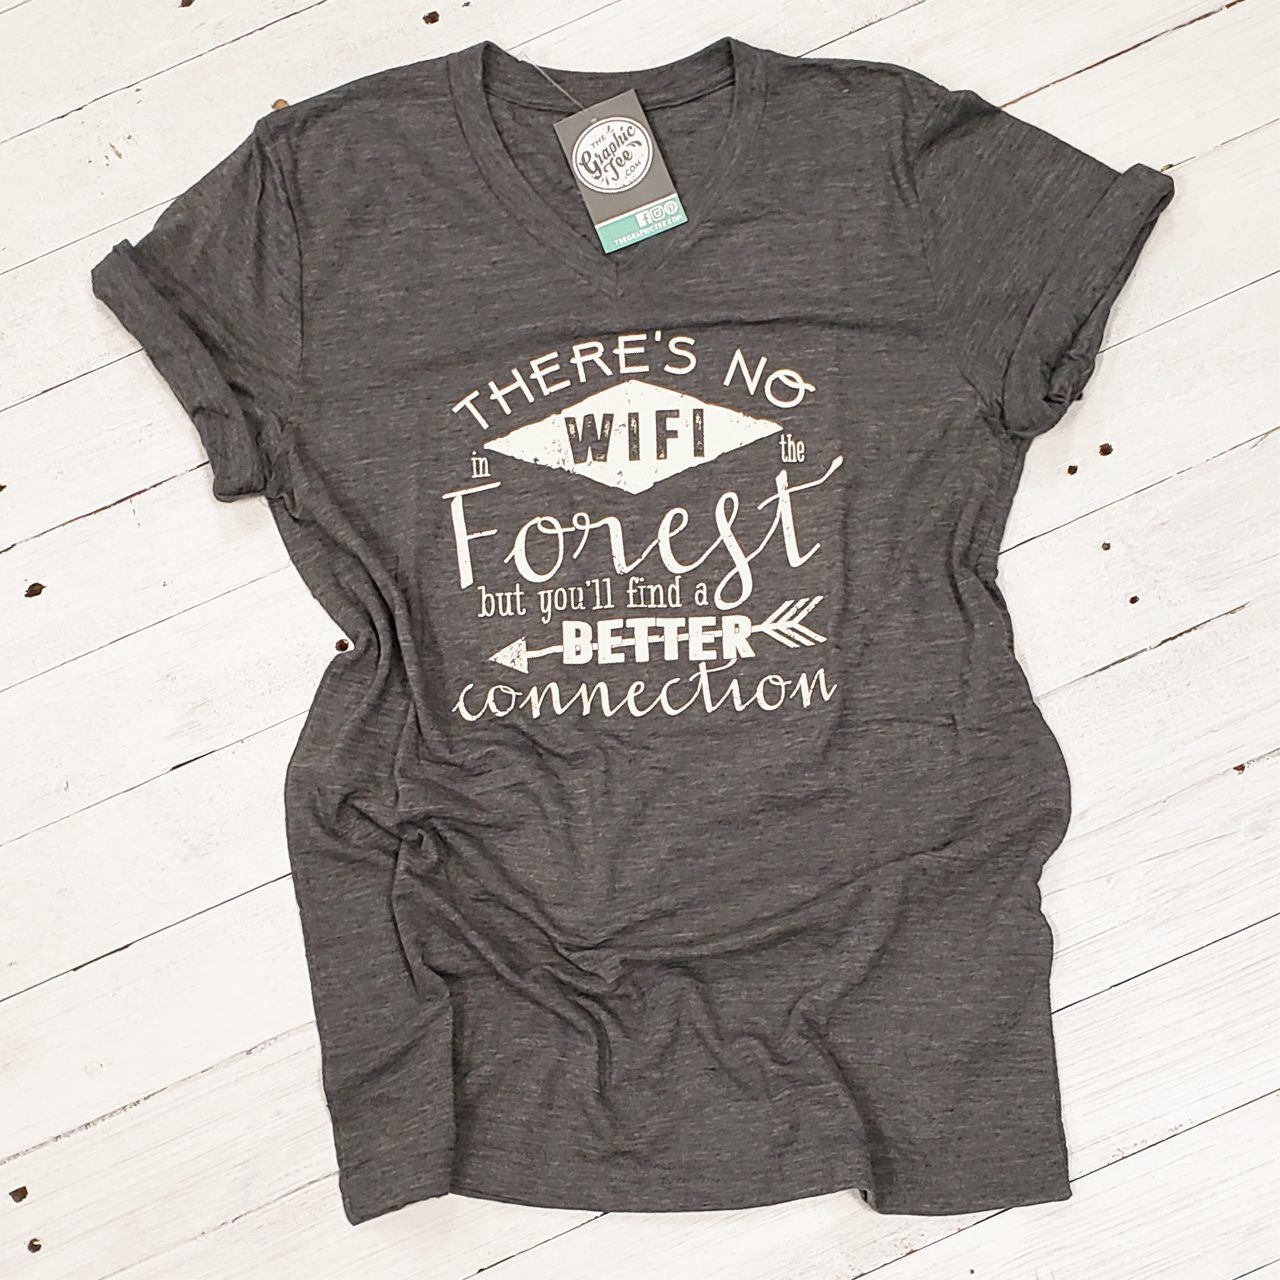 There's No WIFI in the Forest, but You'll Find a Better Connection - Unisex V-Neck Tee - The Graphic Tee